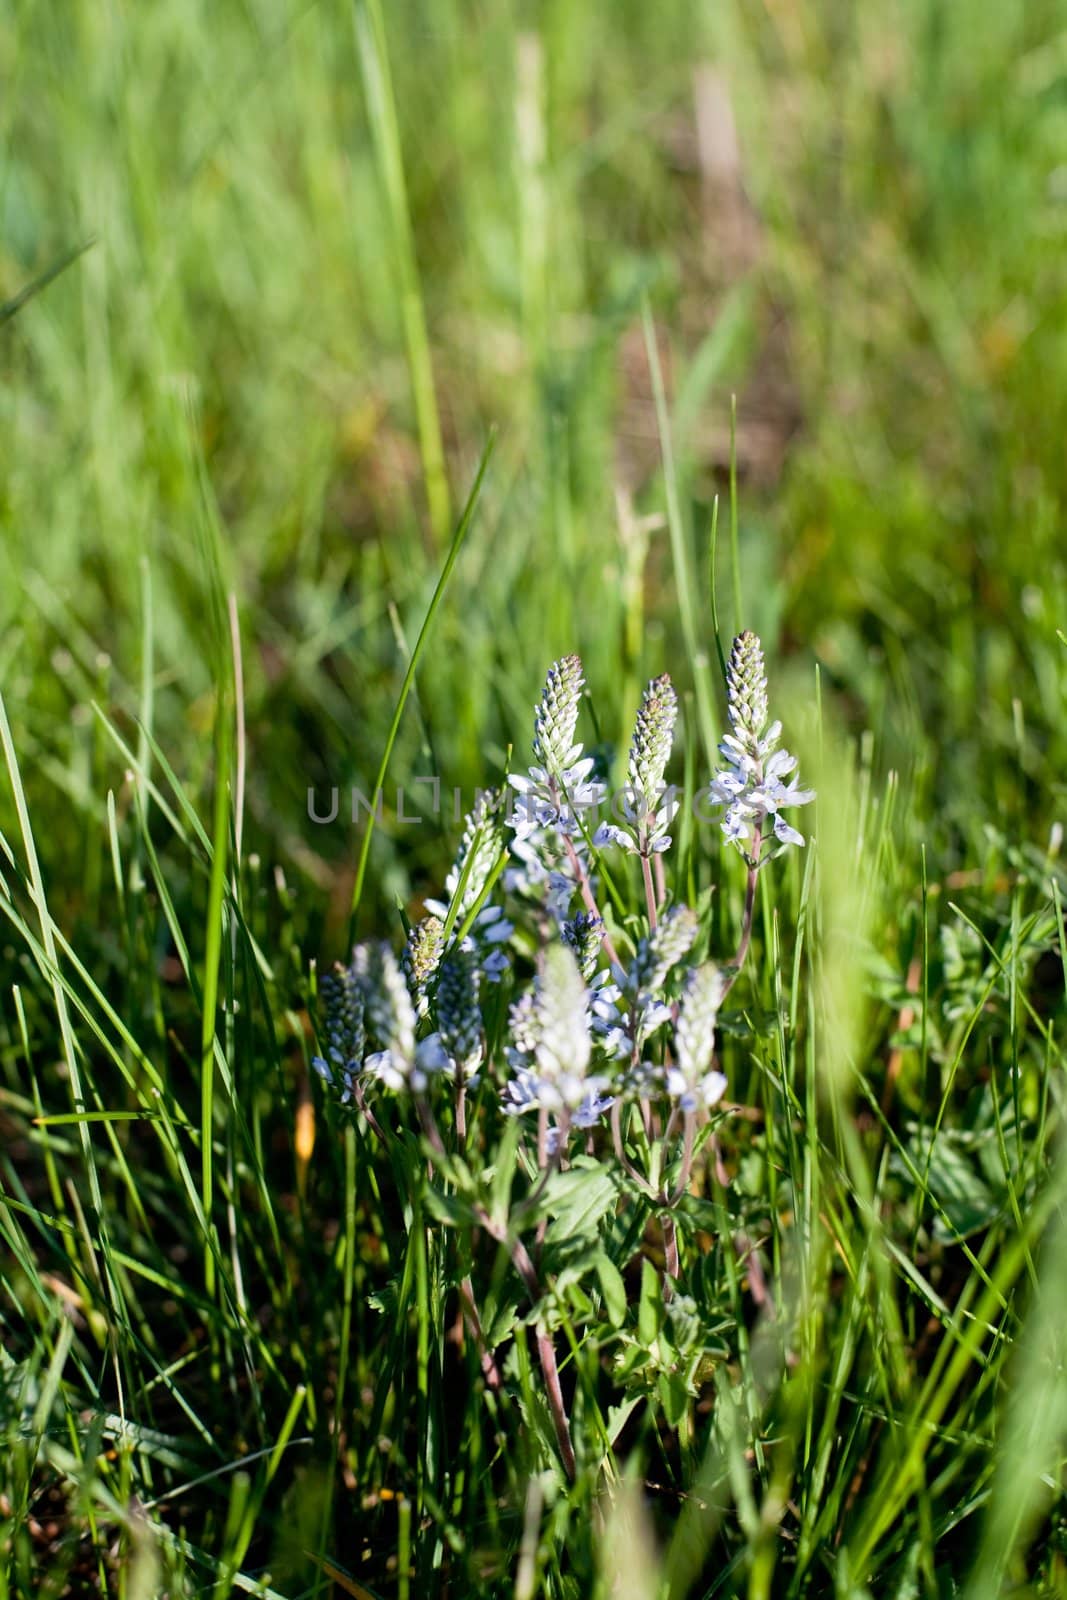 An image of flowers in the grass